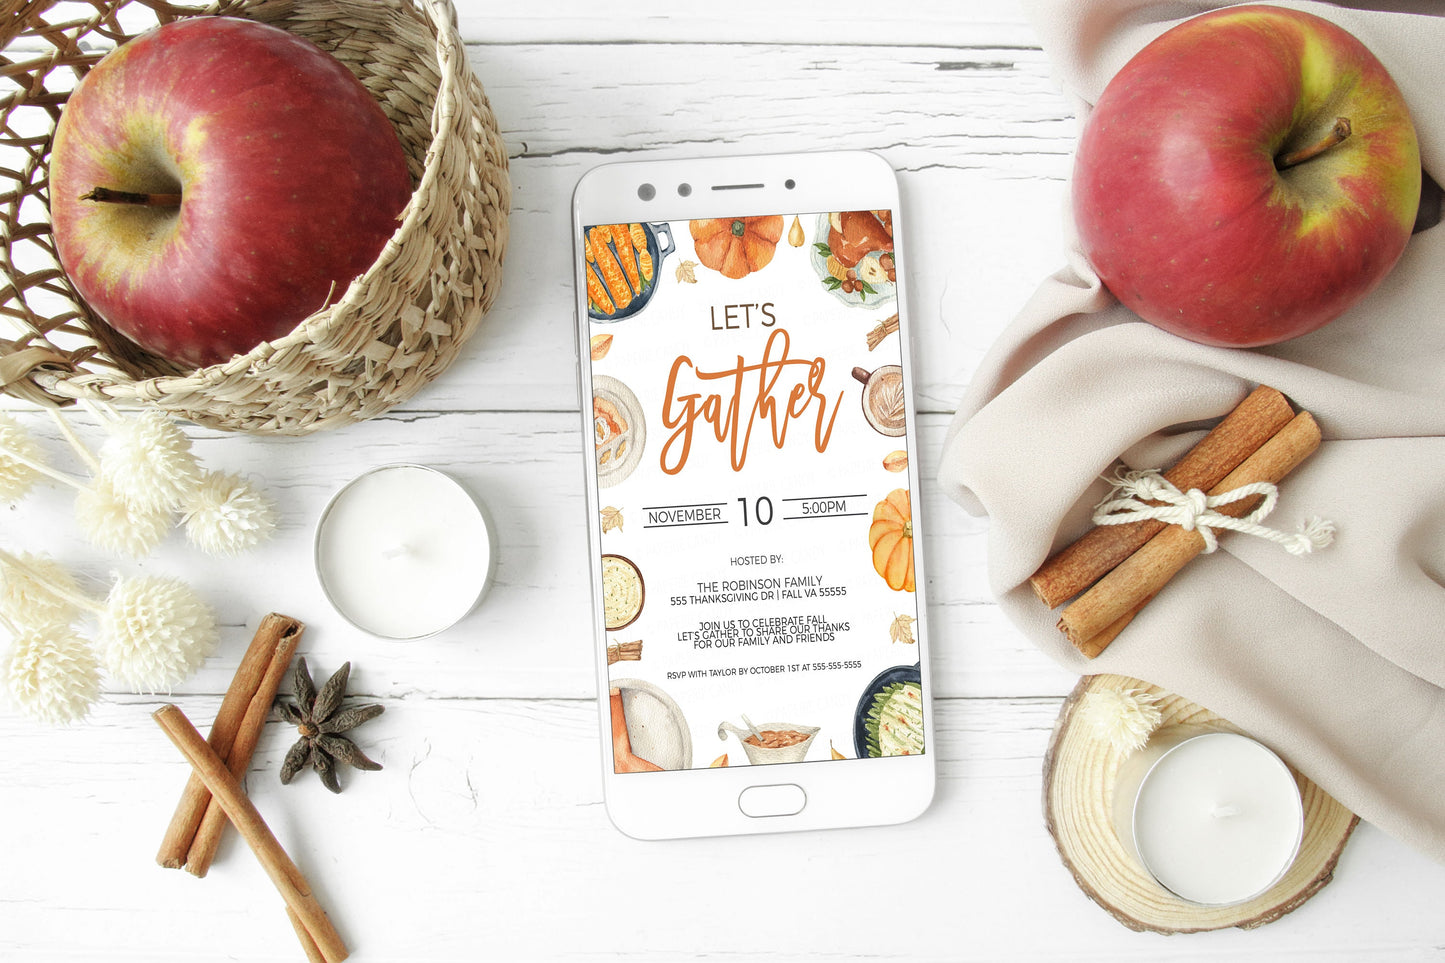 Let's Gather Invitation, Editable Thanksgiving Party Invite, Turkey Dinner Lunch Luncheon, Thanksgiving Appreciation, Printable Template